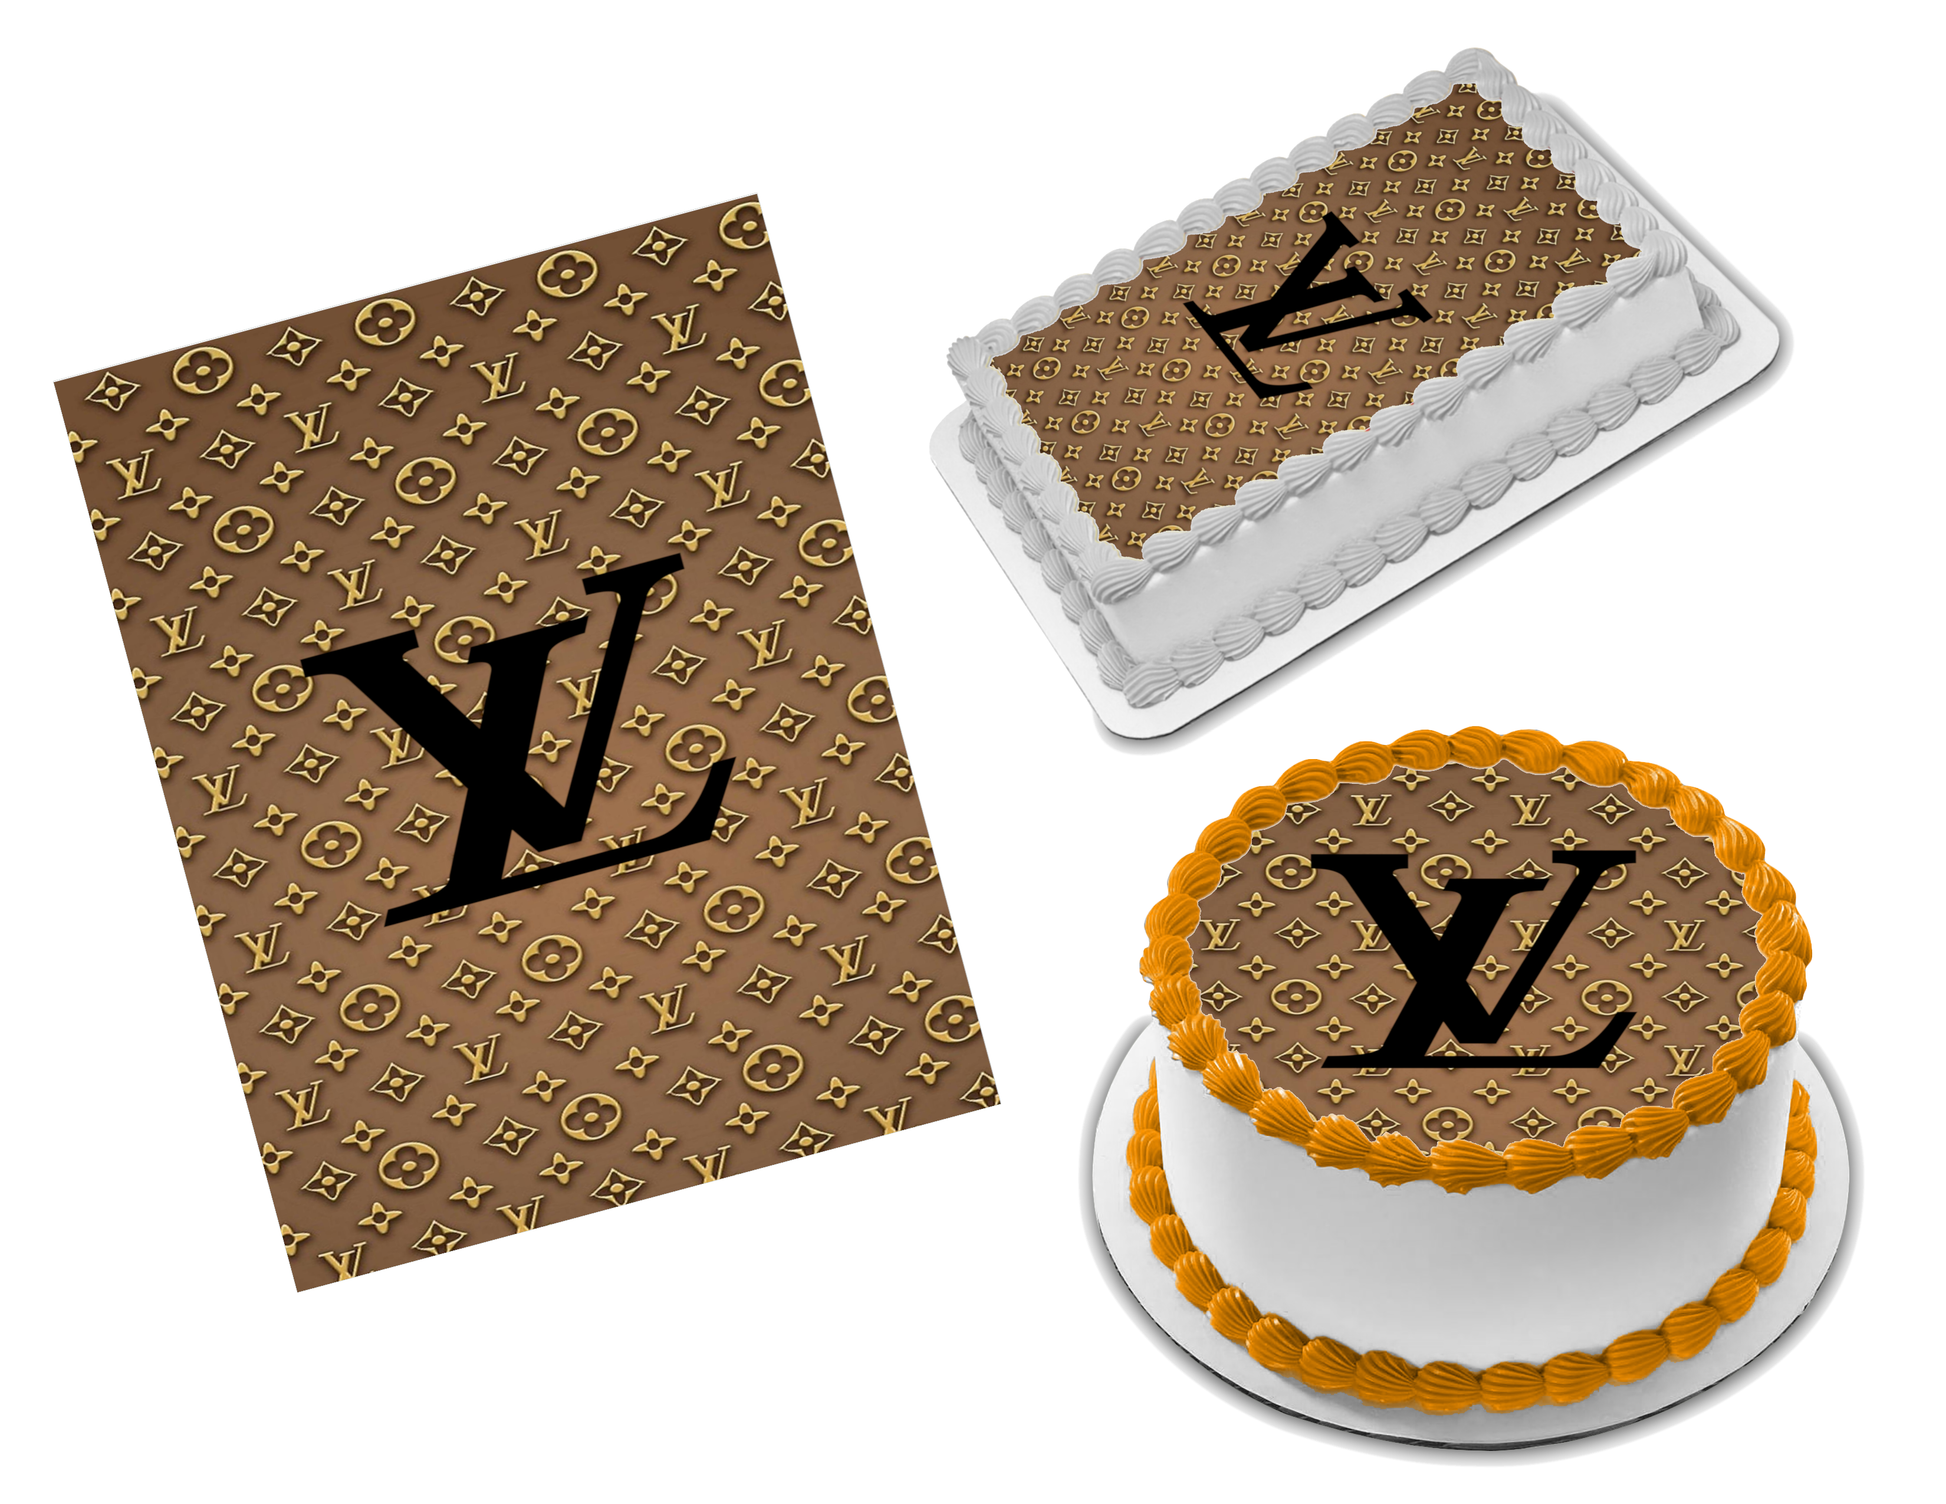 Yes I made it :-) Louis Vuitton Cake